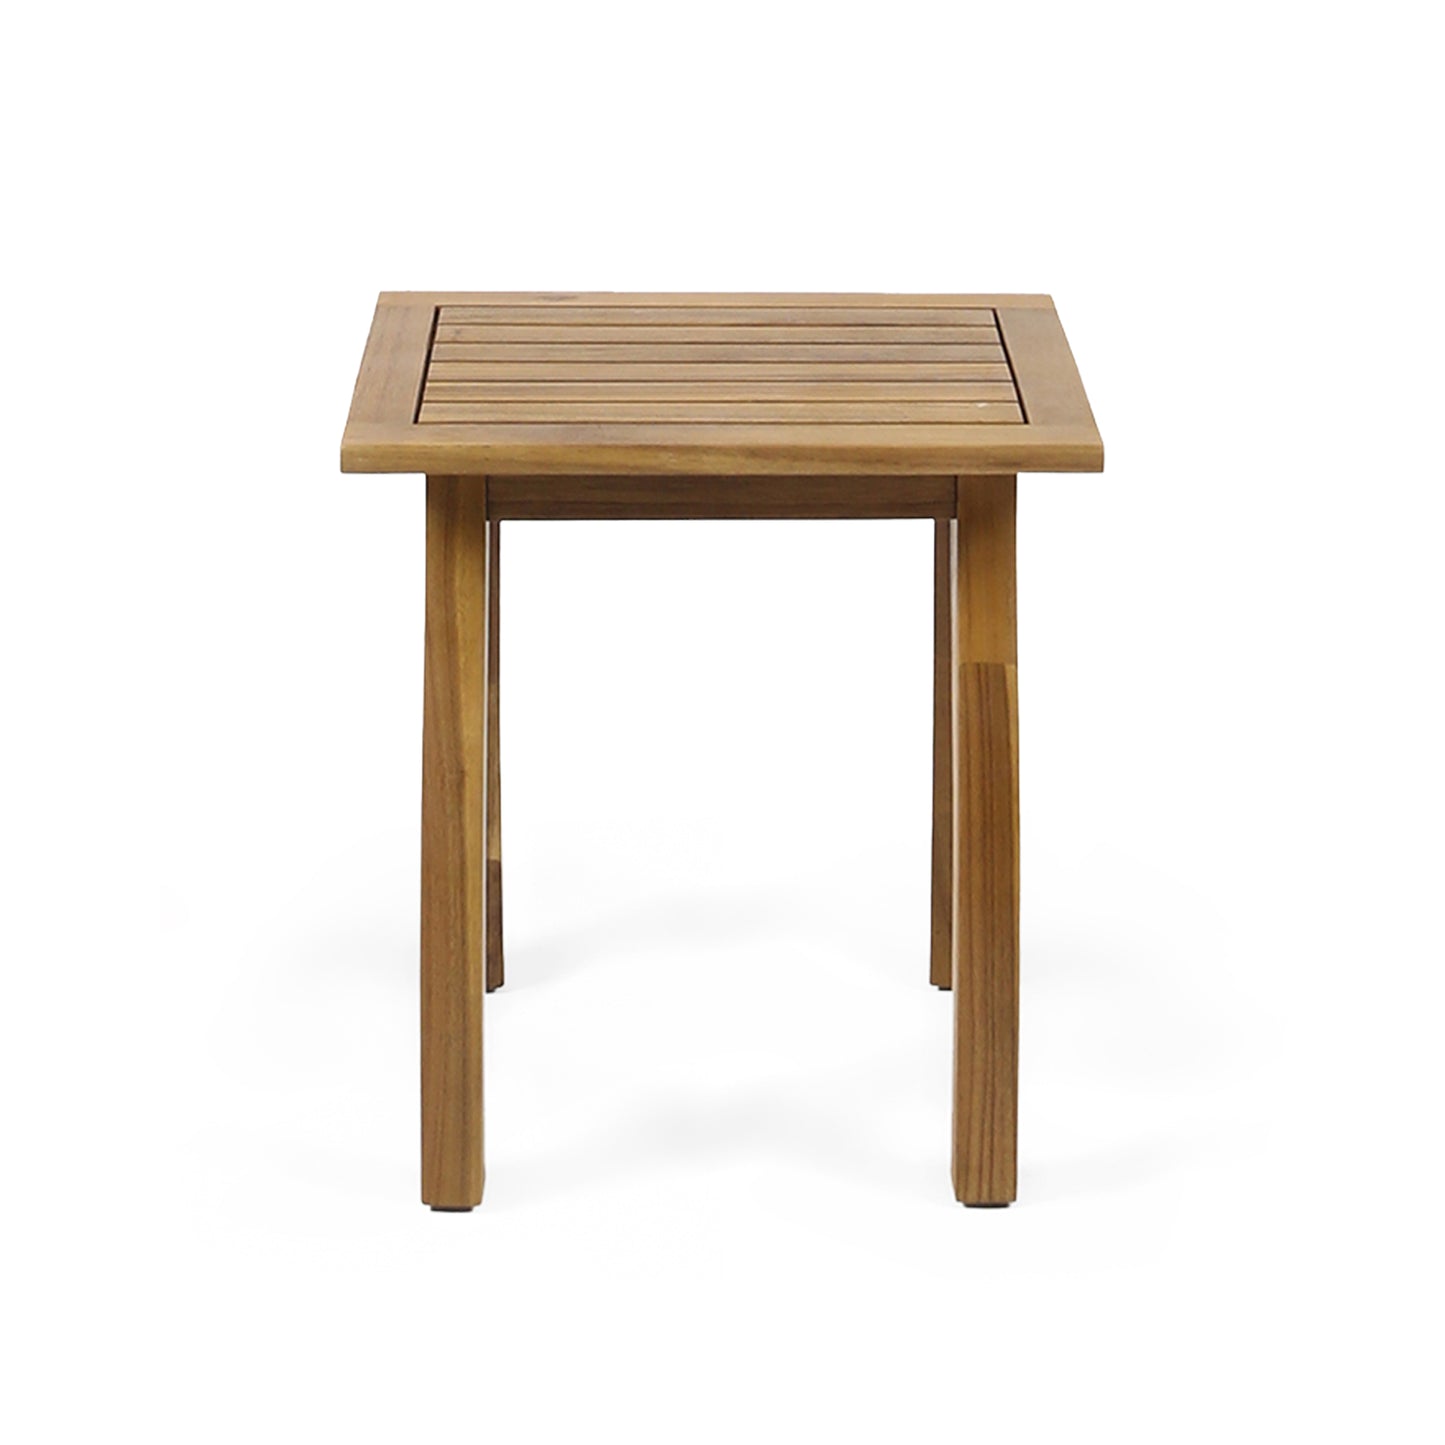 Yadira Outdoor Acacia Wood Chat Set with Side Table